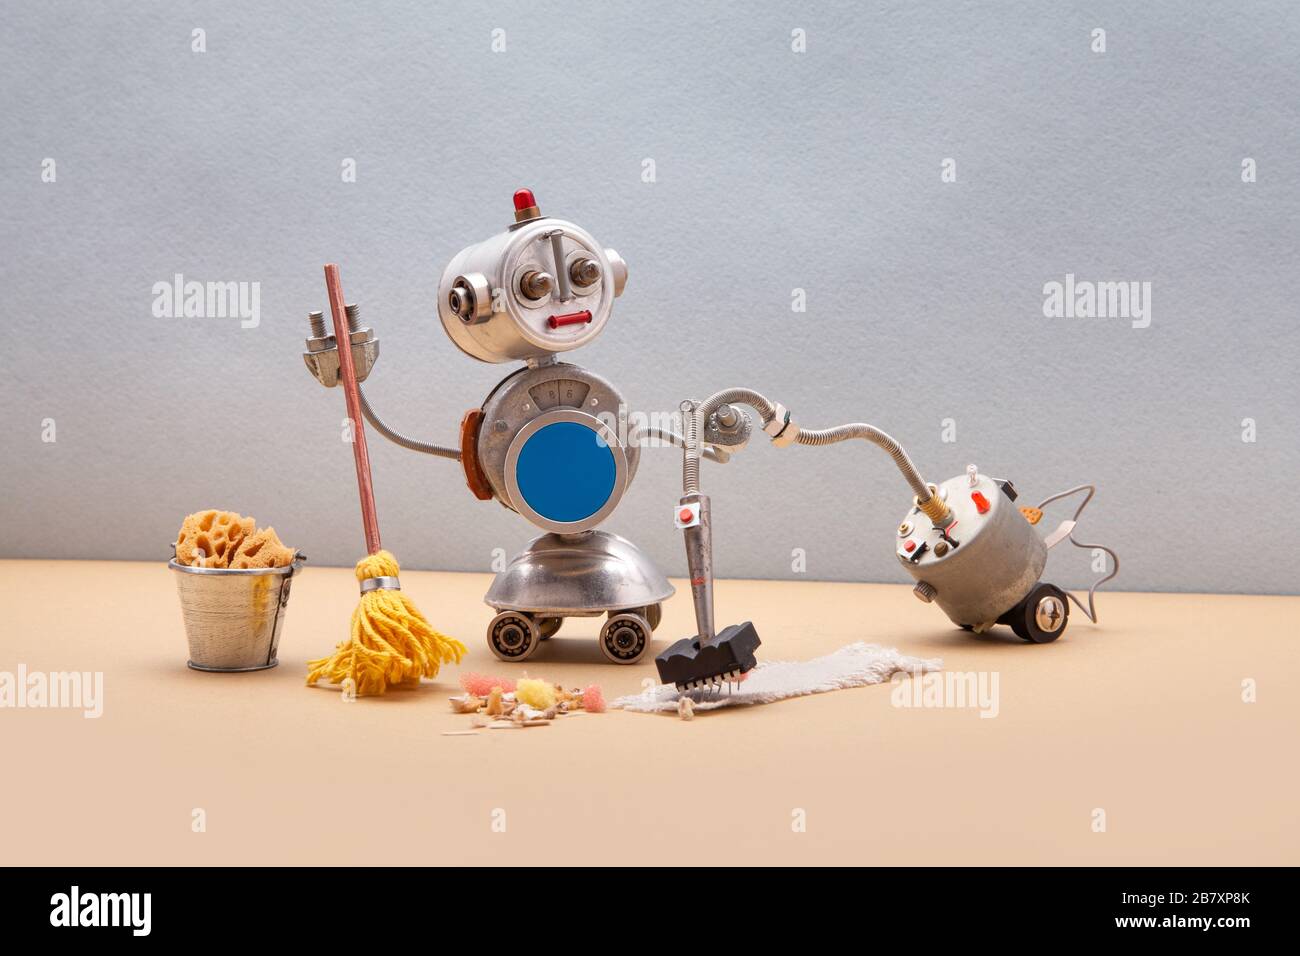 Domestic robot janitor with vacuum cleaner machine disinfects sanitize  room, vacuuming and sweeping floor and carpet. Autonomous disinfection  service Stock Photo - Alamy